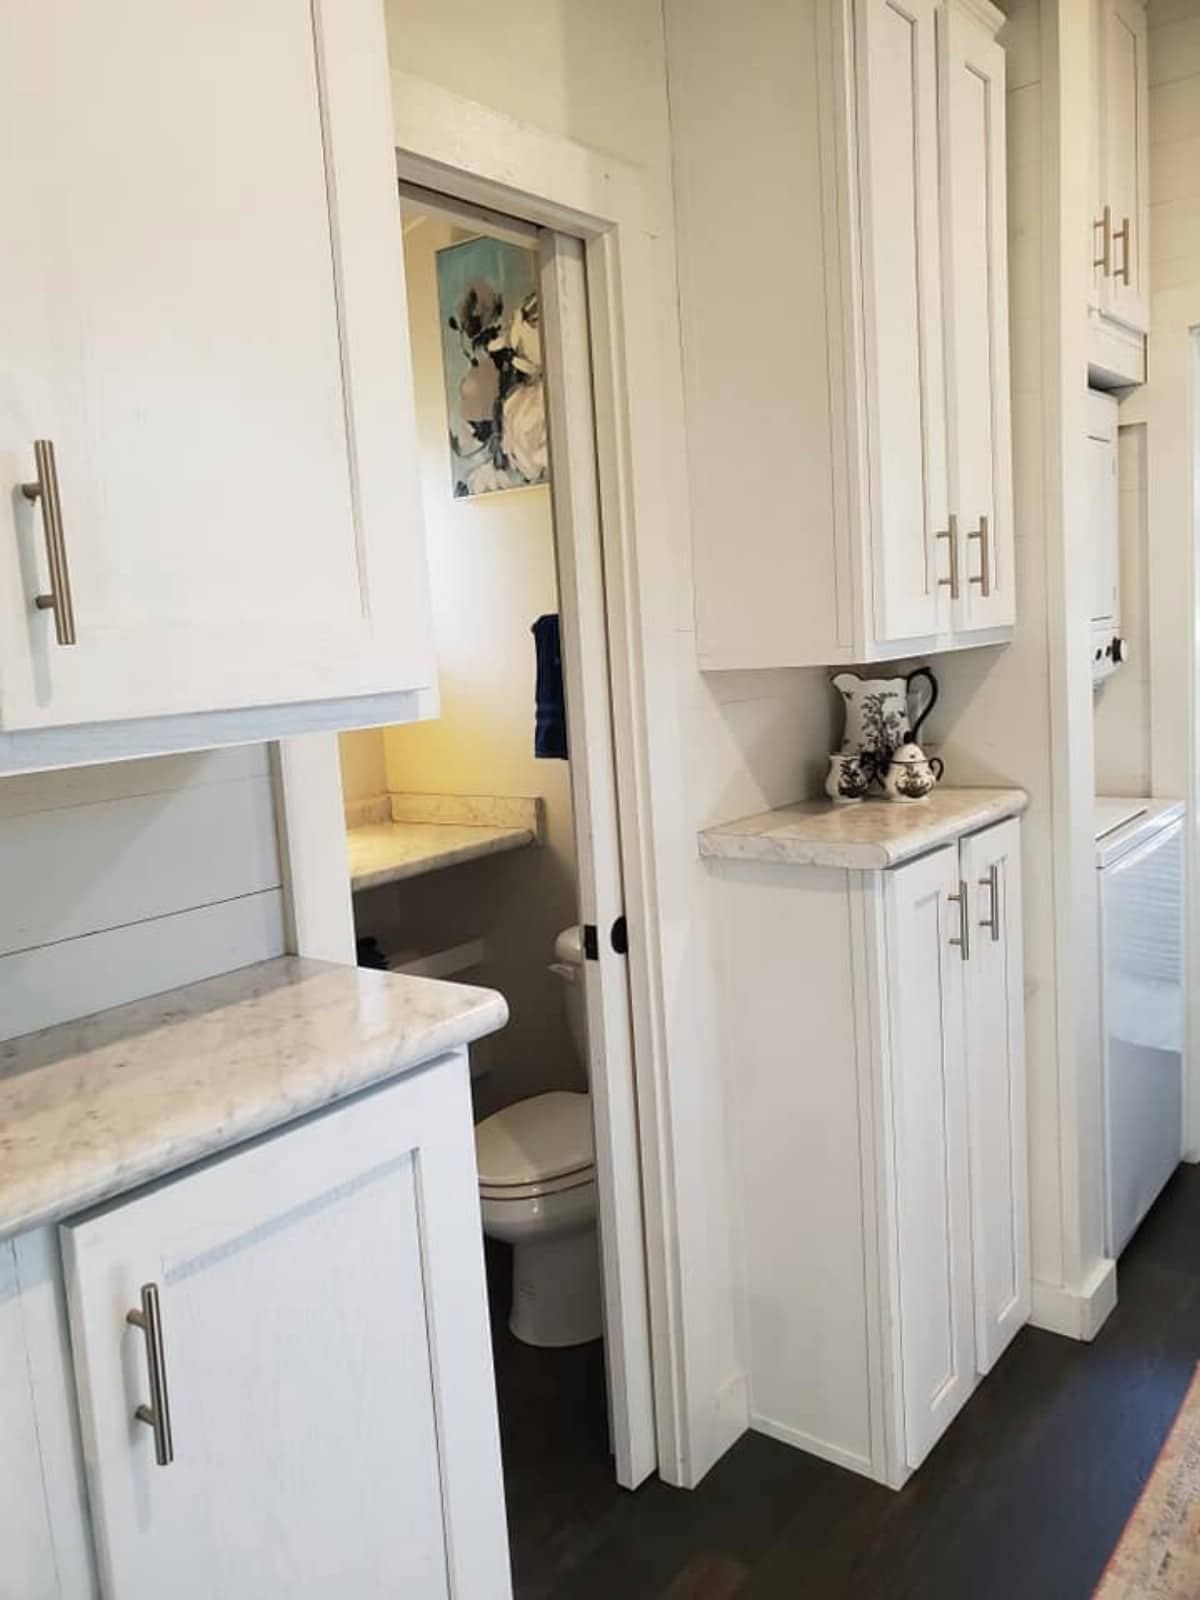 Cabinets in kitchen